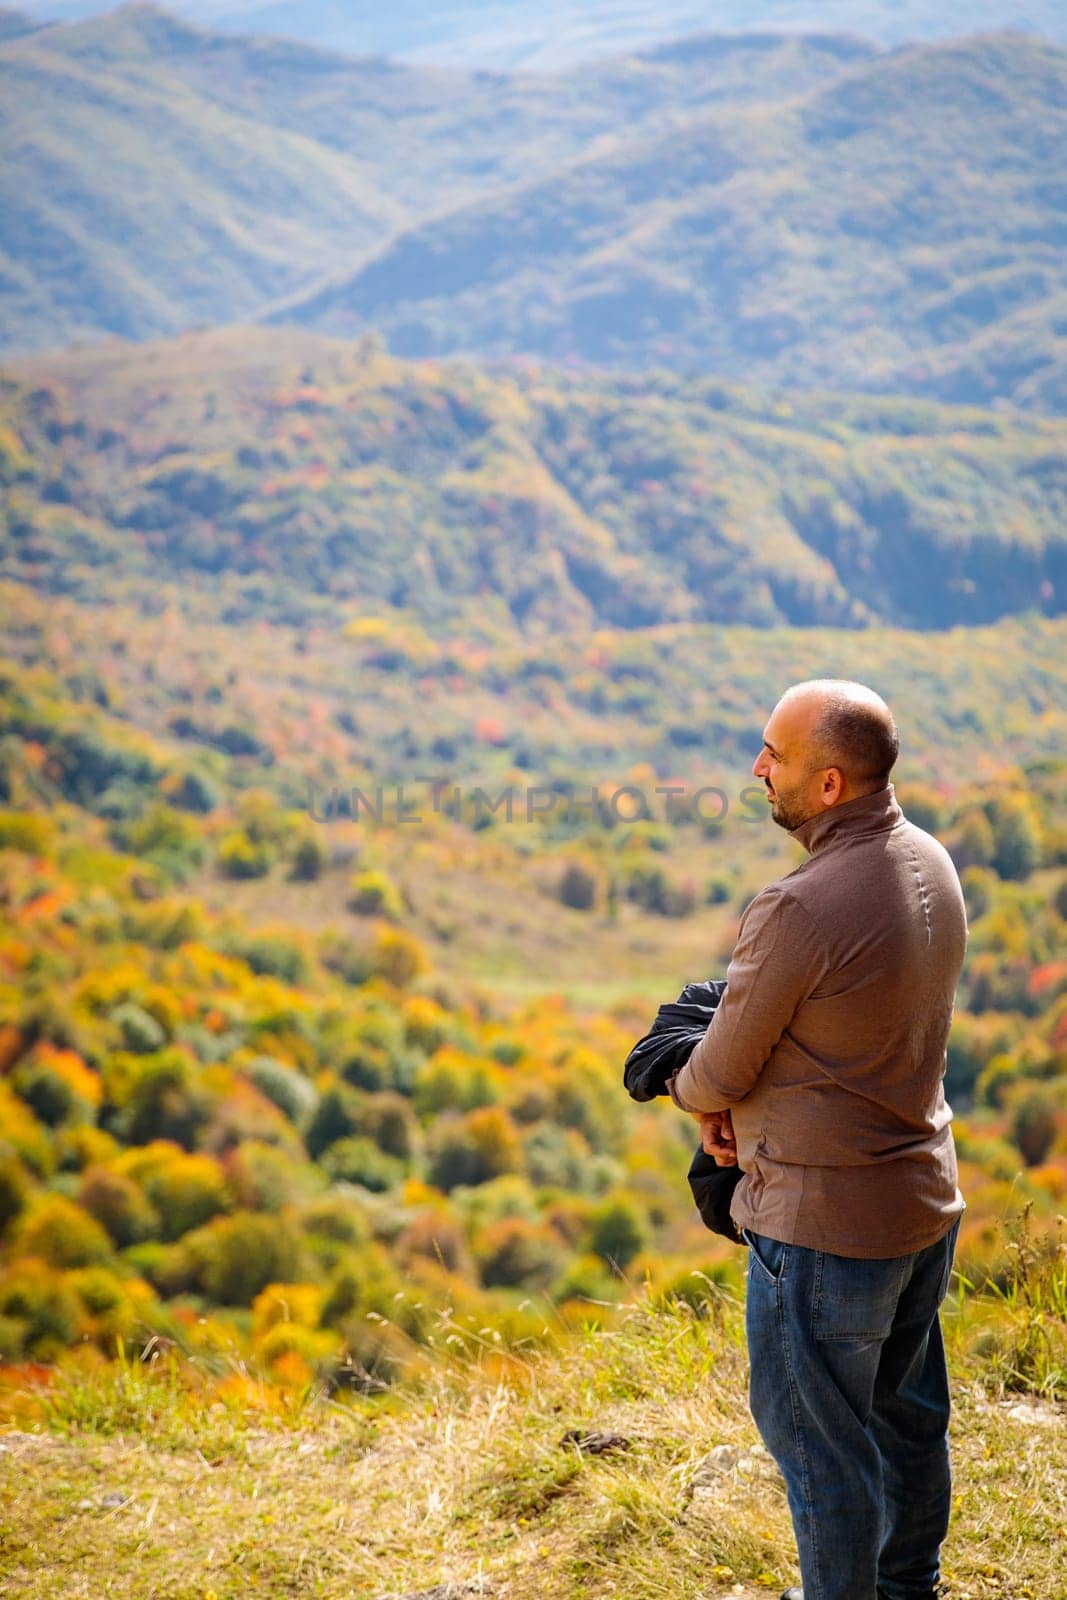 A serene moment captured as a man looks out in awe at the spectacular mountain landscape from a sacred outlook point, with the vast valley below creating a breathtaking scene.